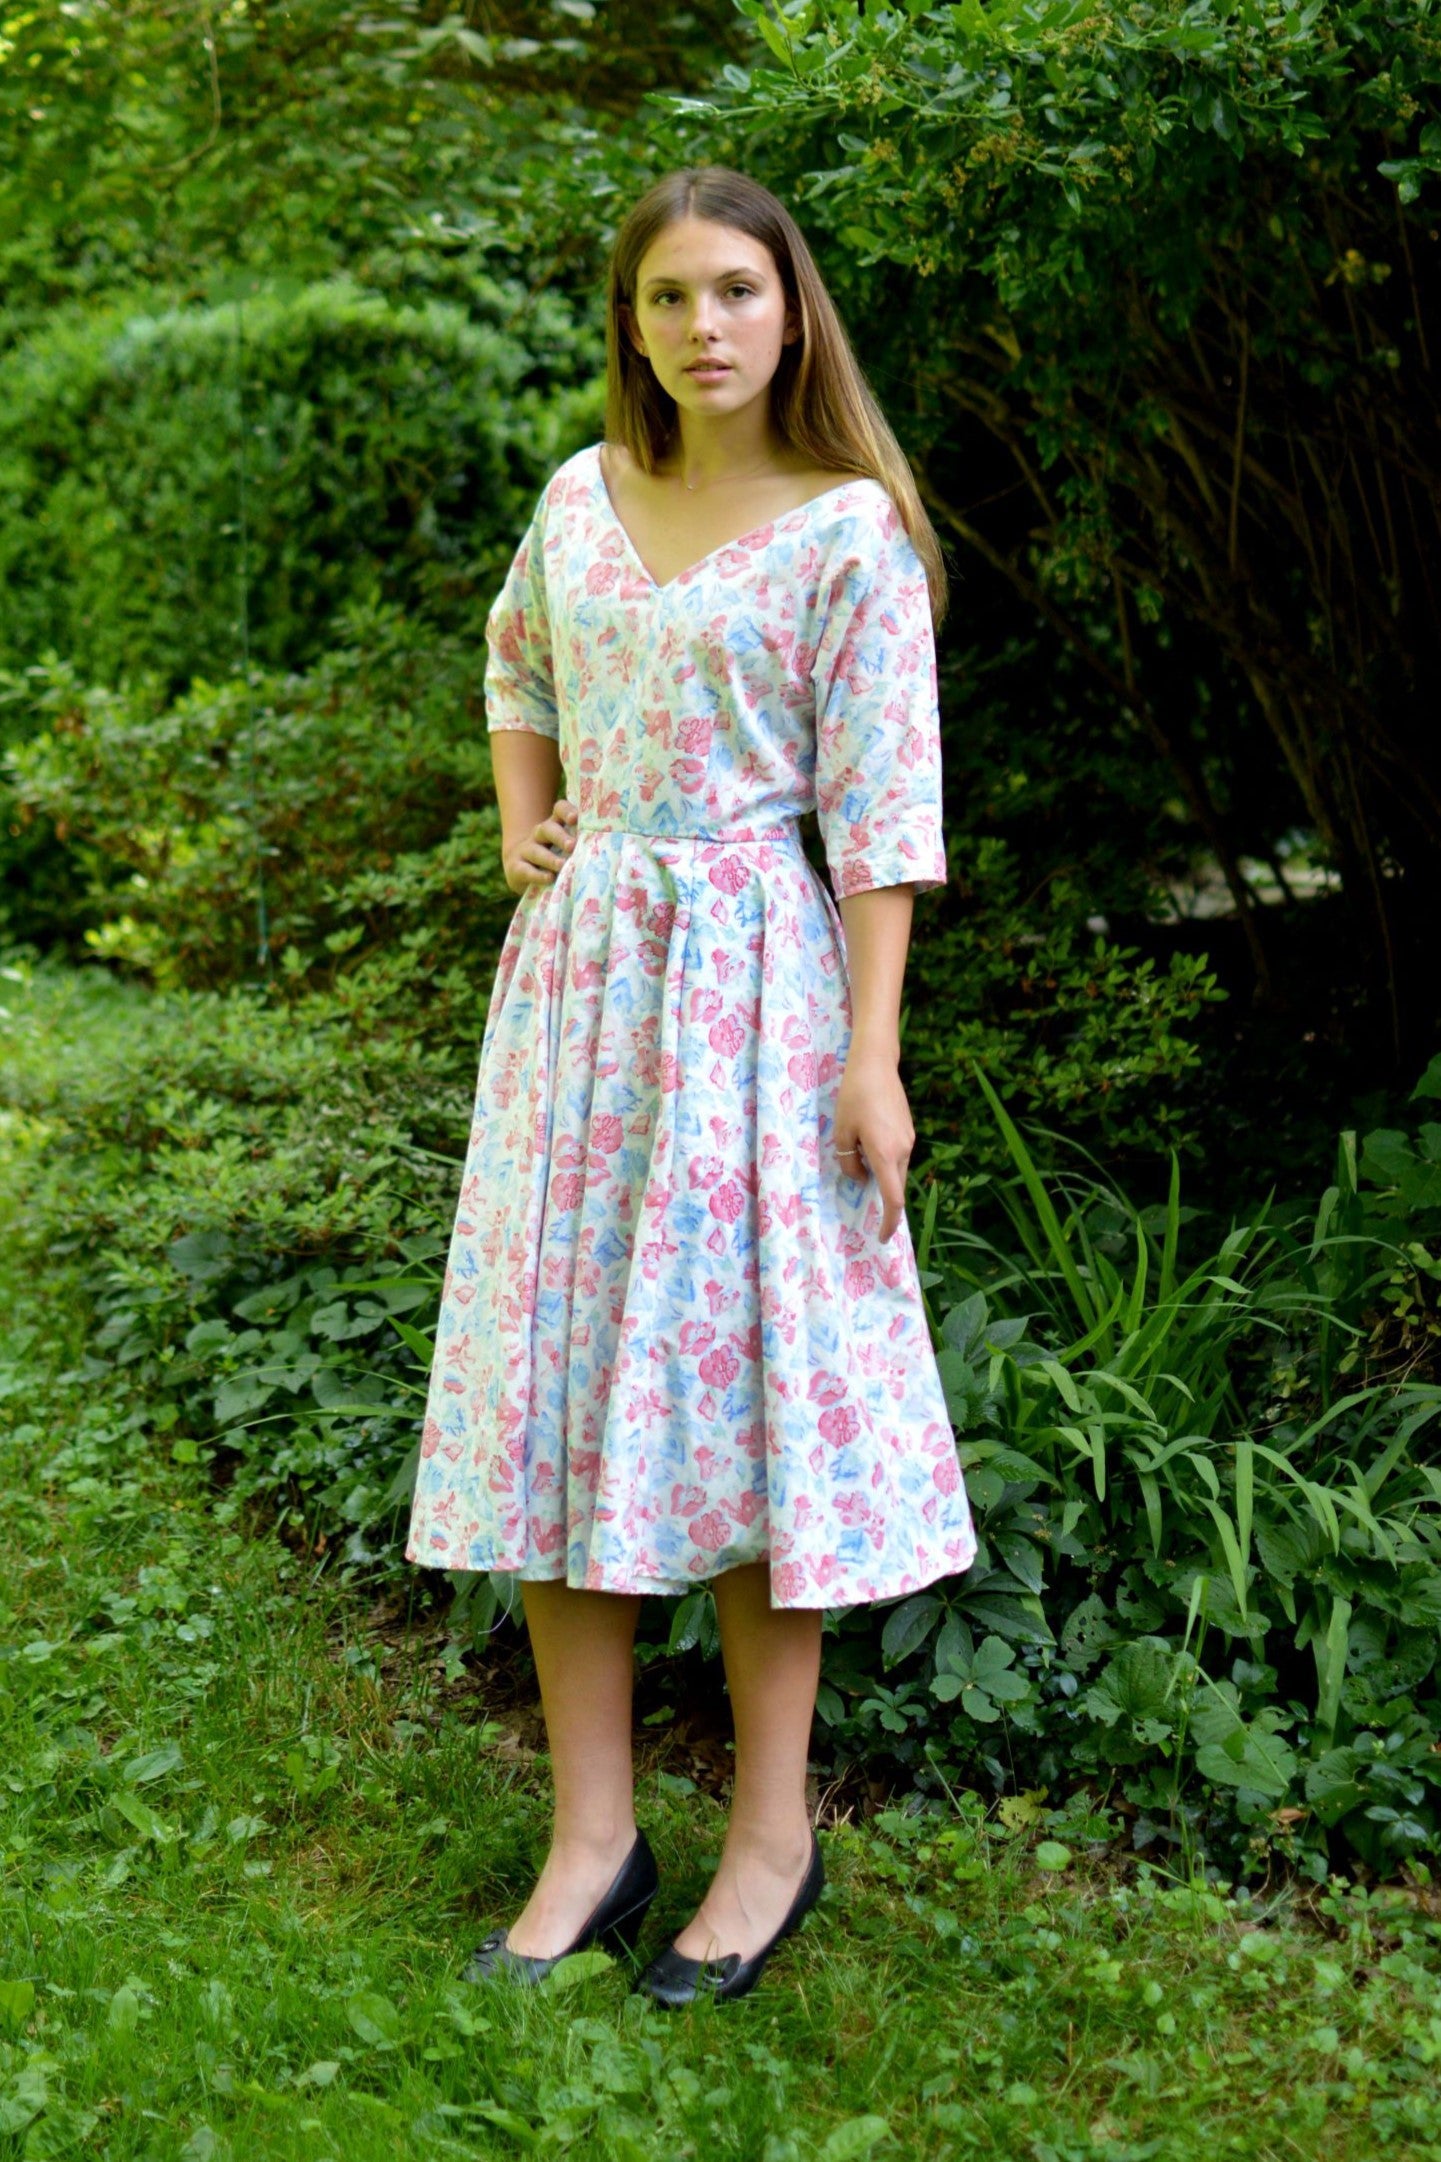 Young woman standing in front of trees and shrubs wearing a white and pink floral print dress with a v-neck.